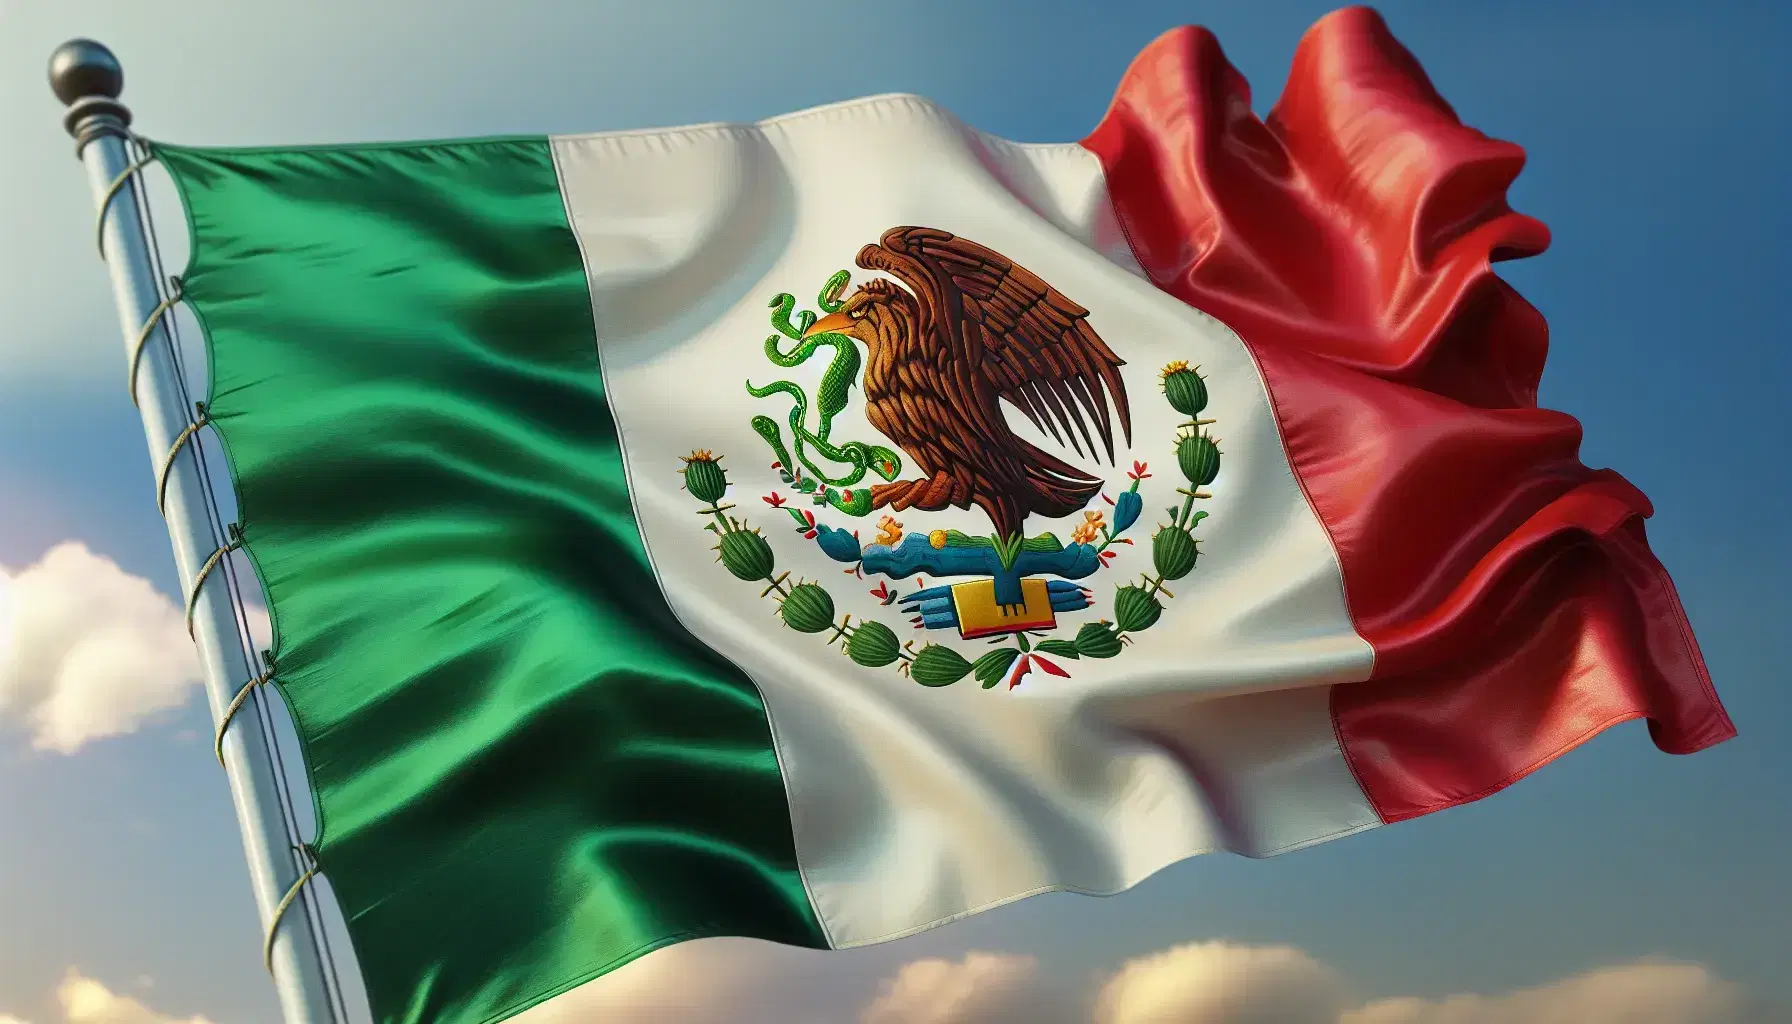 Flag of Mexico with eagle on cactus and snake in the center, green, white and red vertical stripes, blue sky with light clouds.